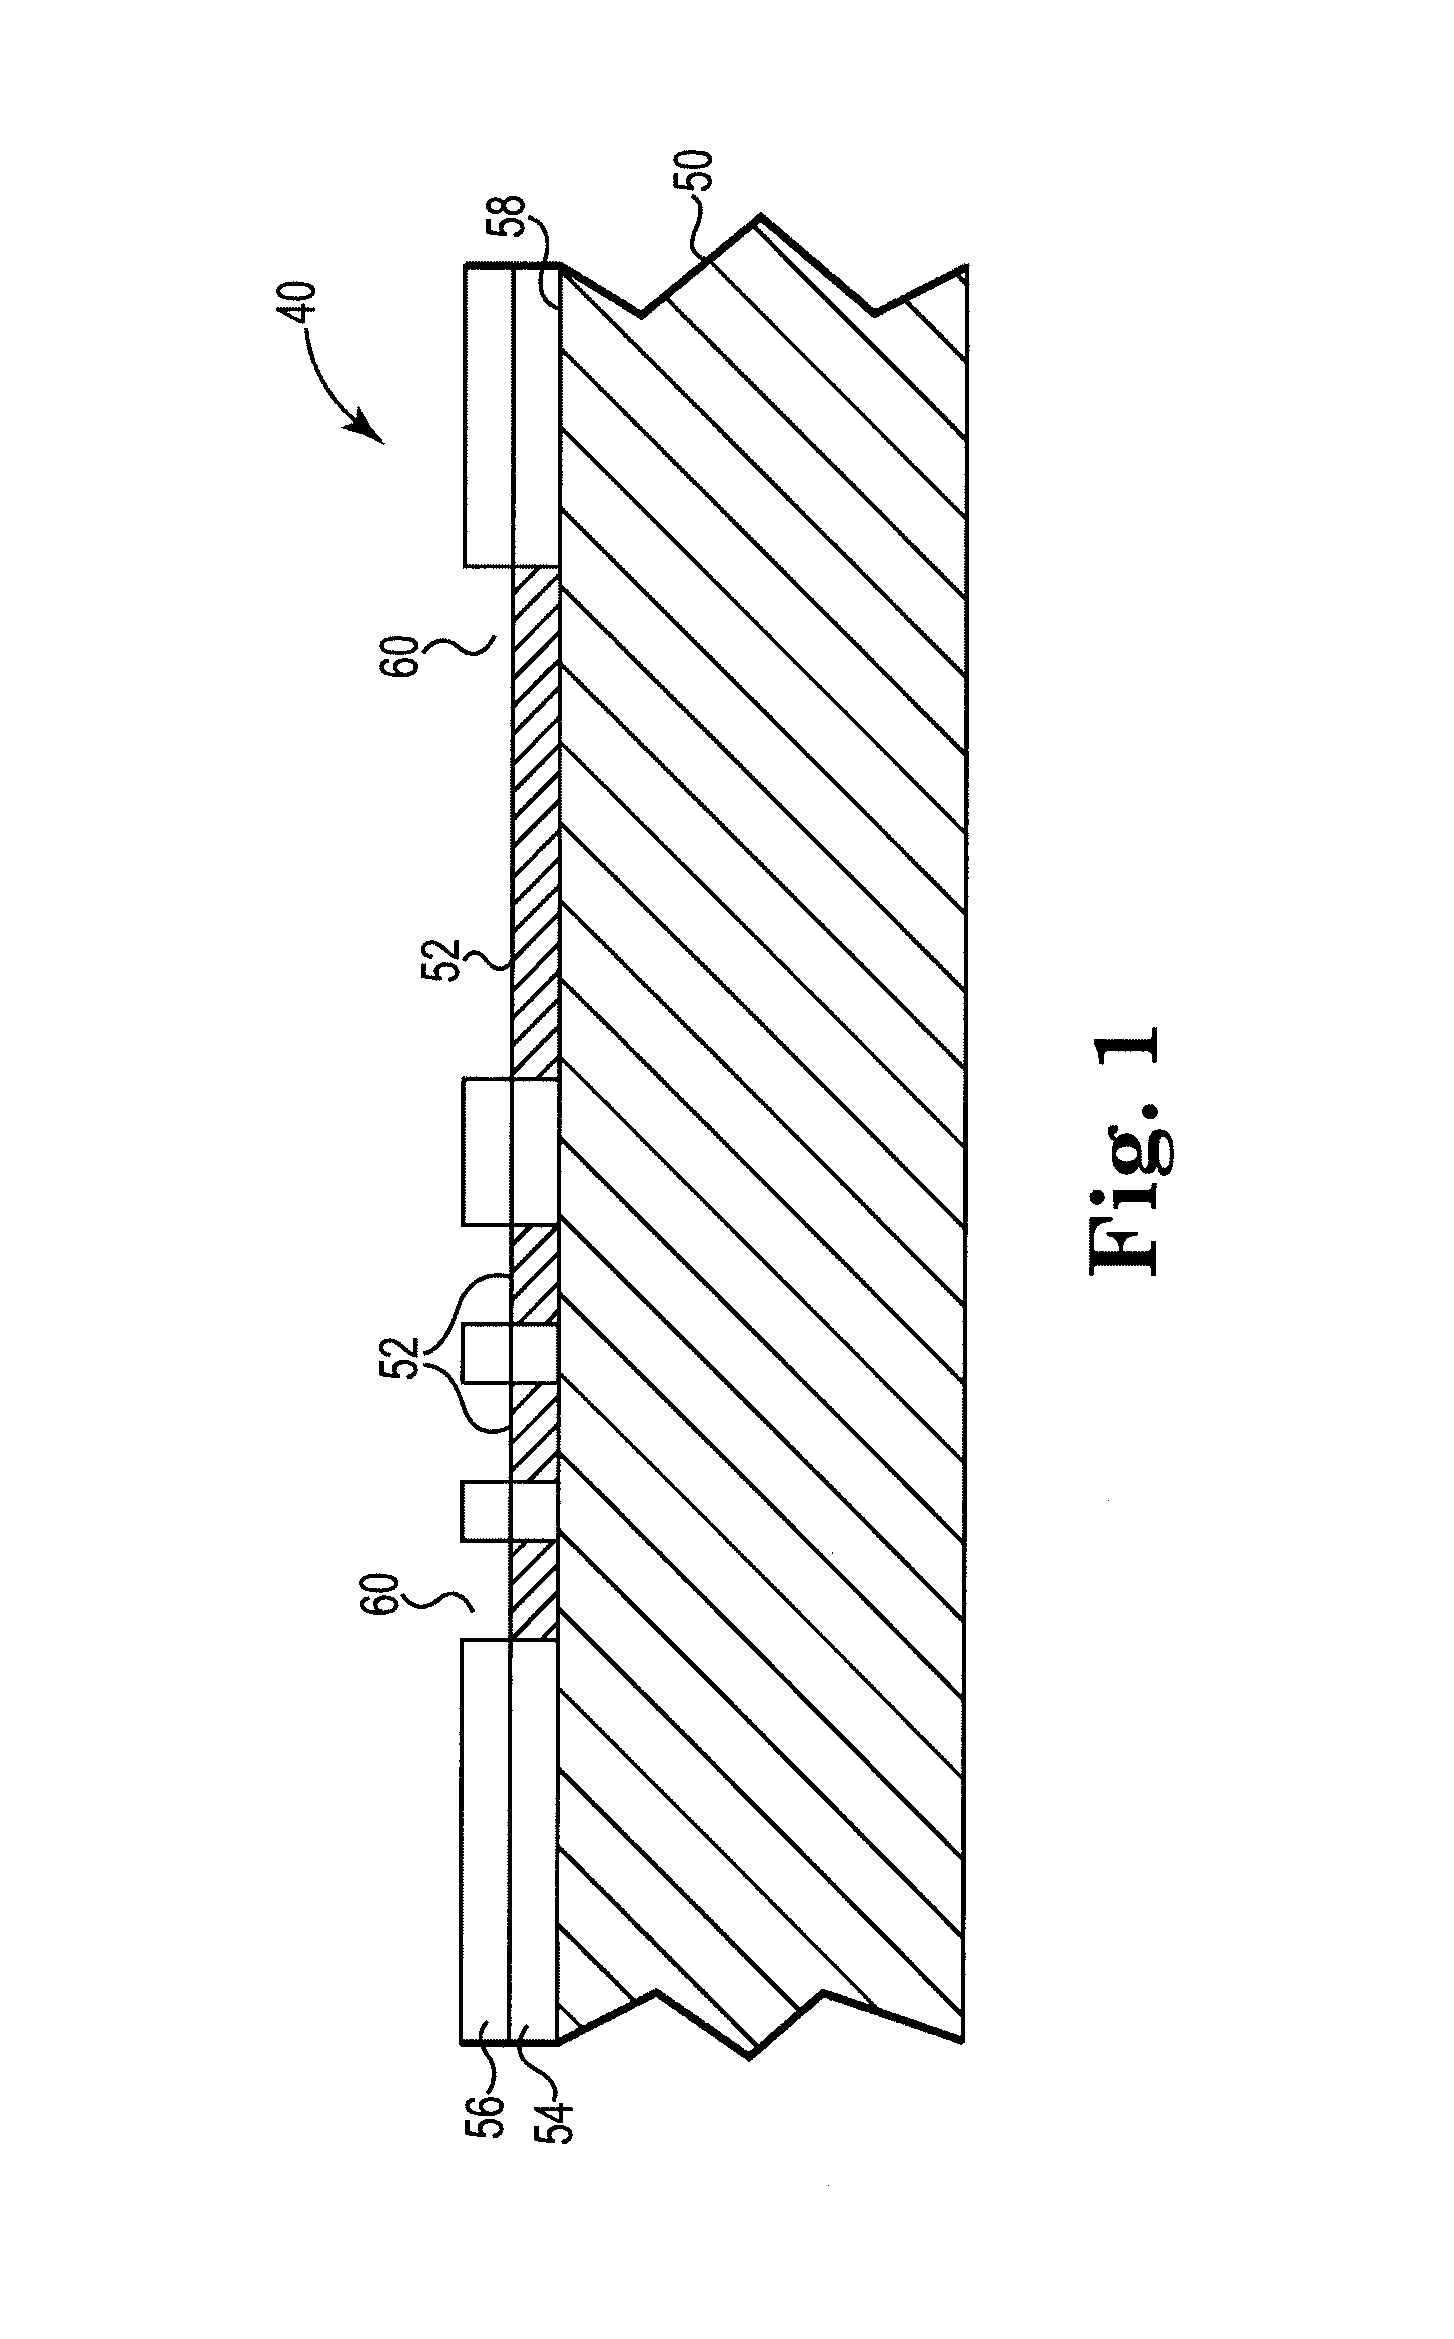 High performance electrical circuit structure